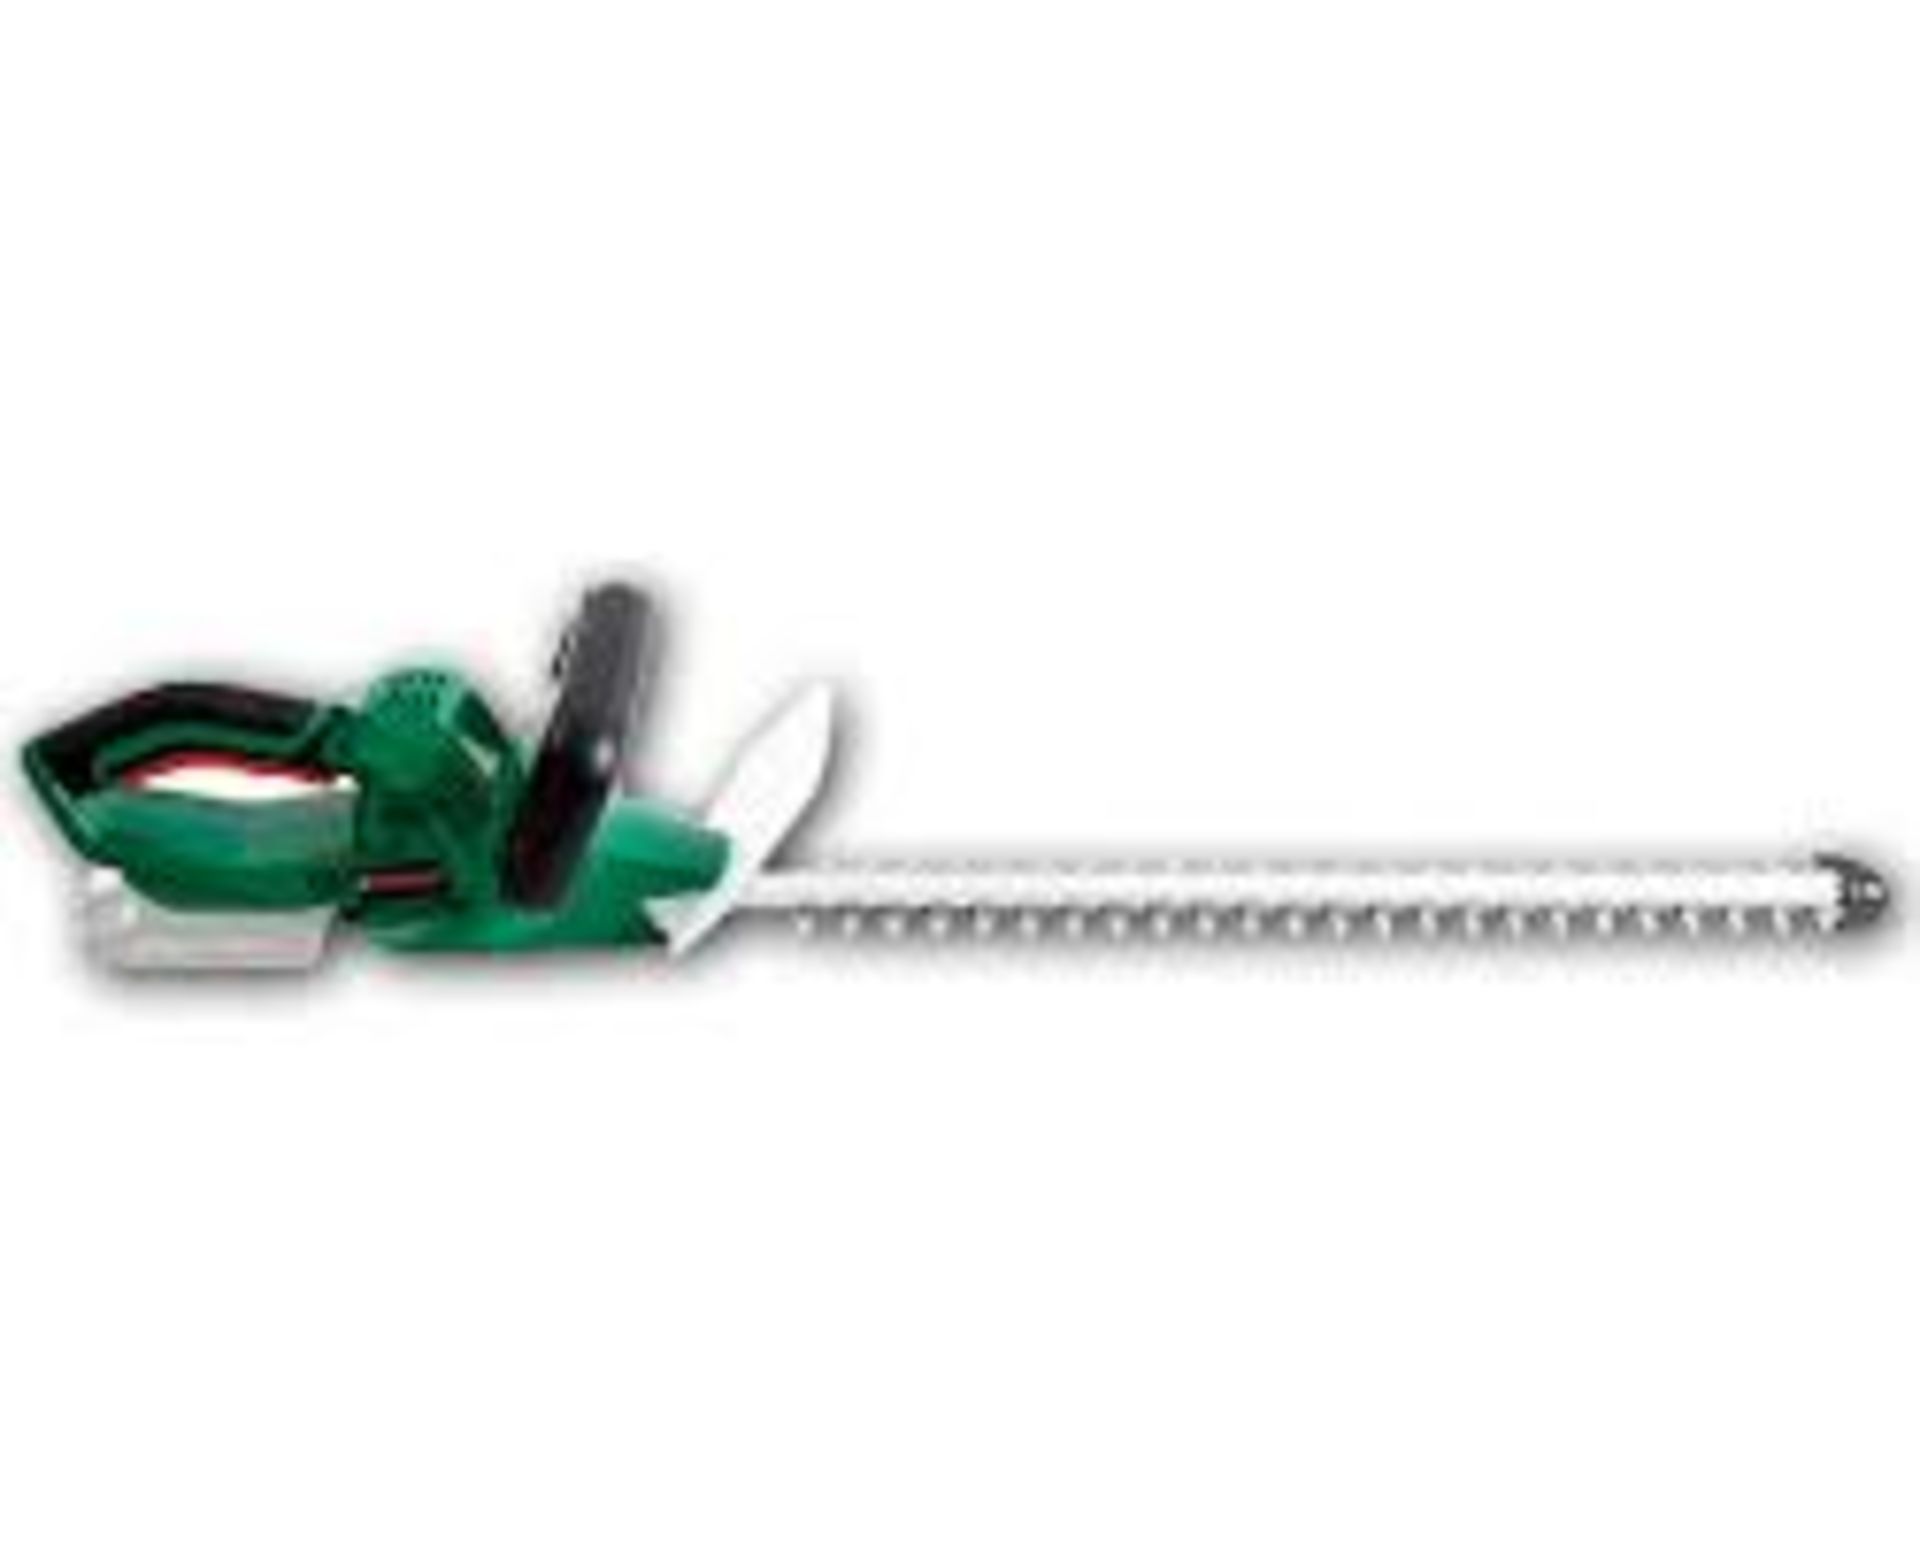 Boxed Ferrex 20V Lithium Iron Cordless Hedge Trimmers (Public Viewing and Appraisals Available)